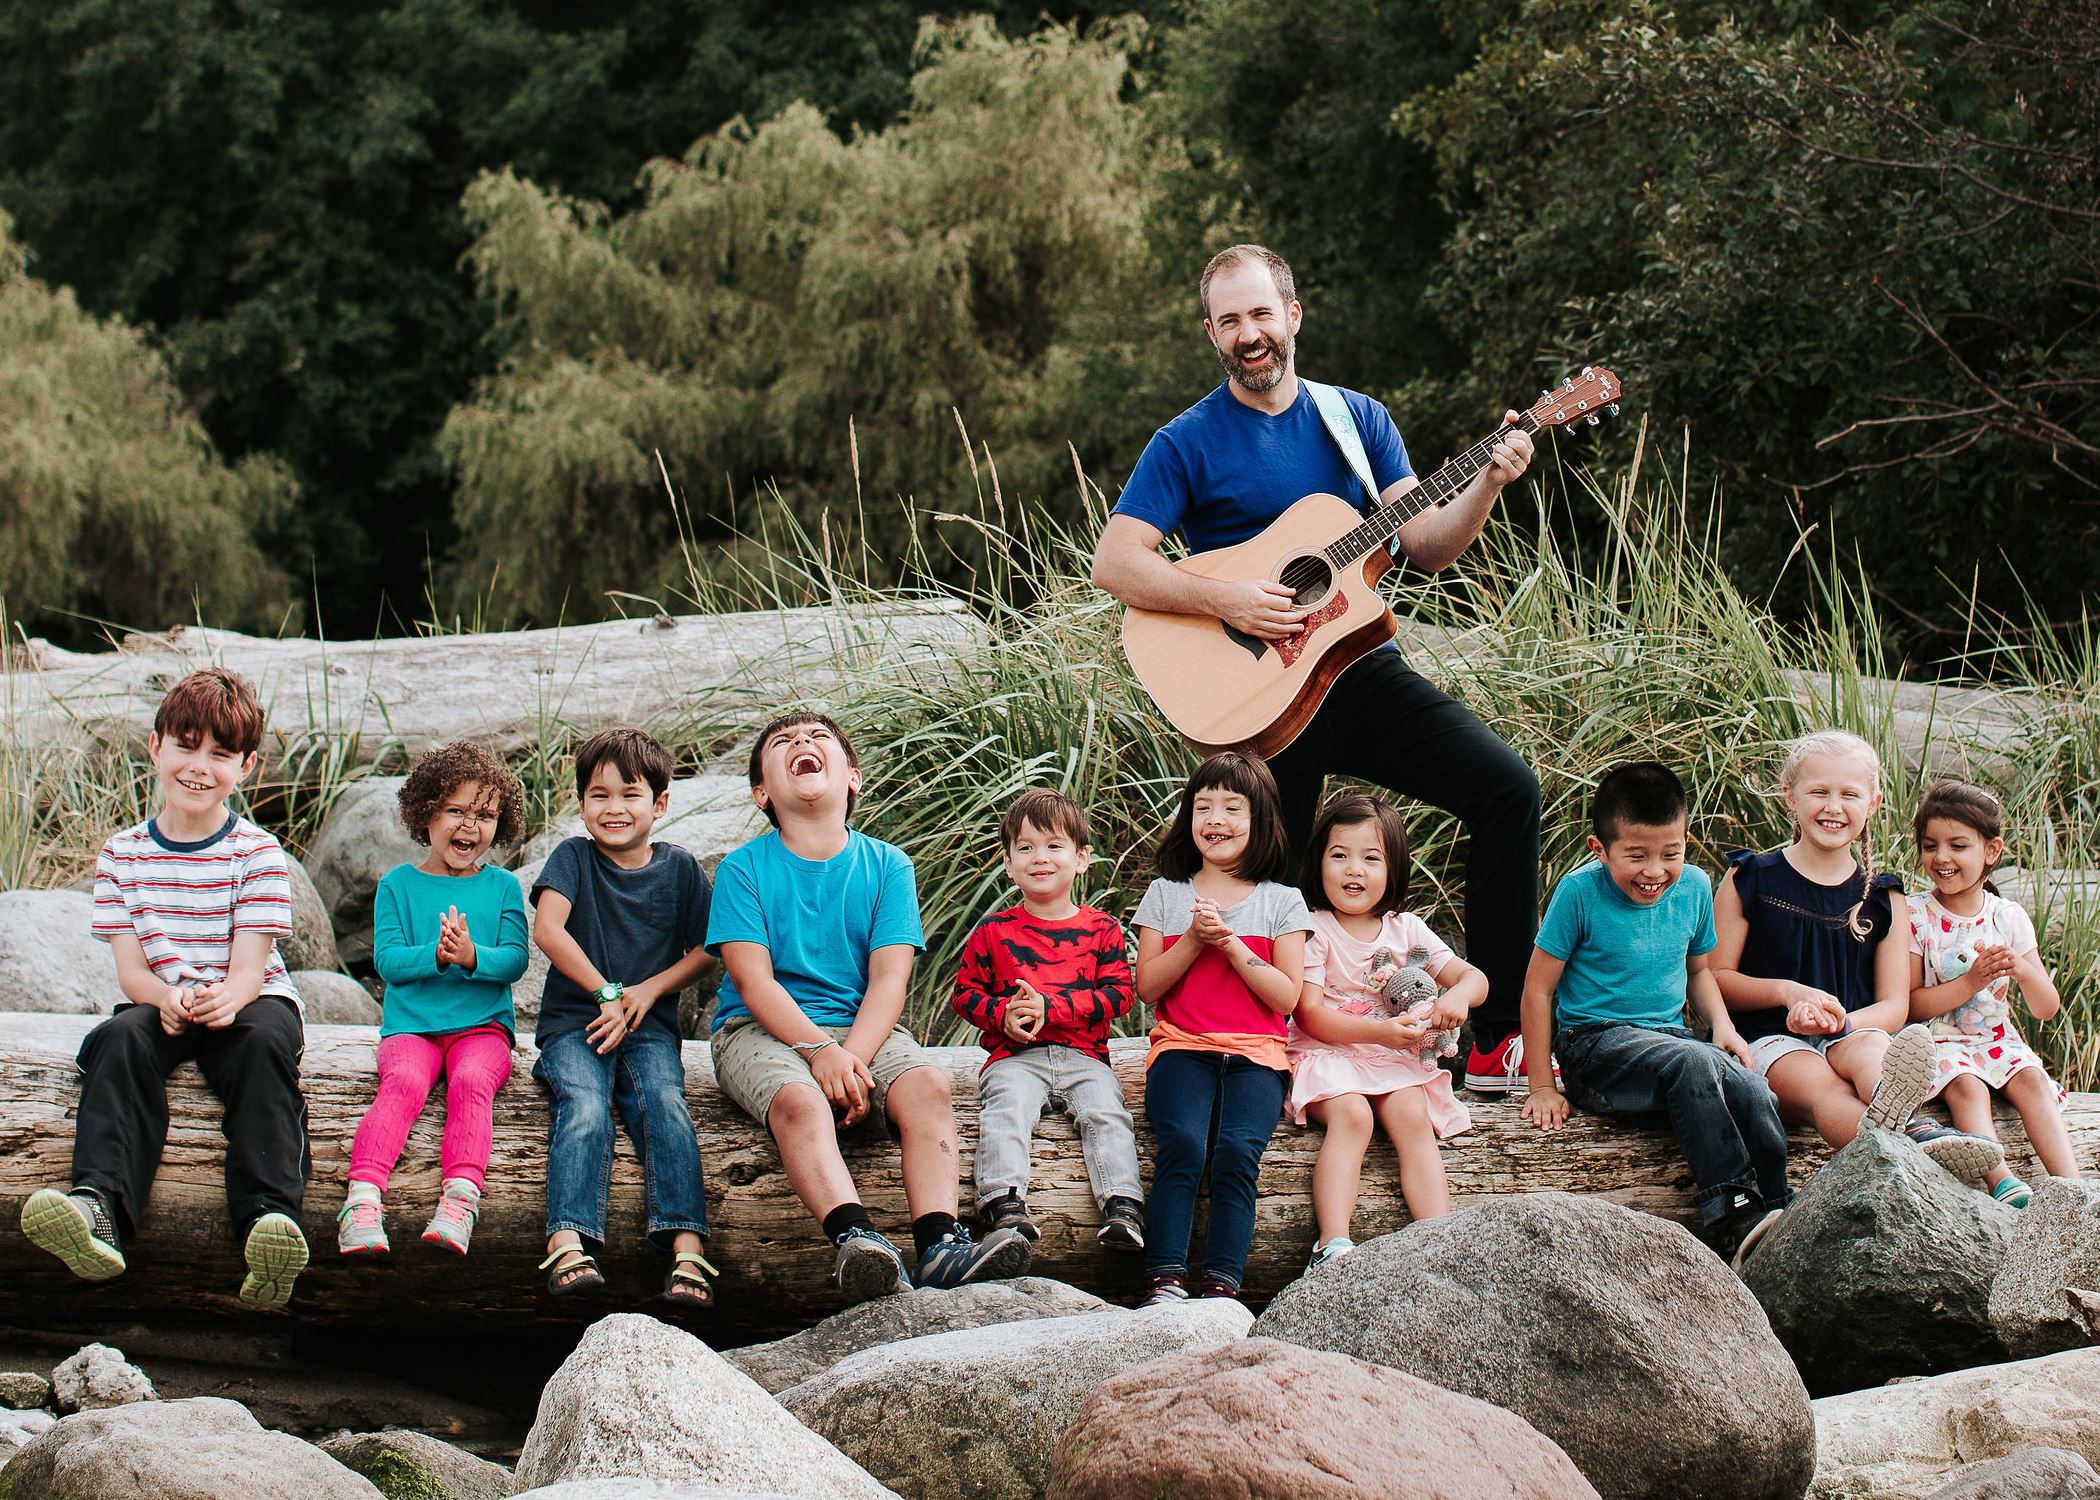 Will standing along a river holding his guitar and a dozen young children sitting in front of him